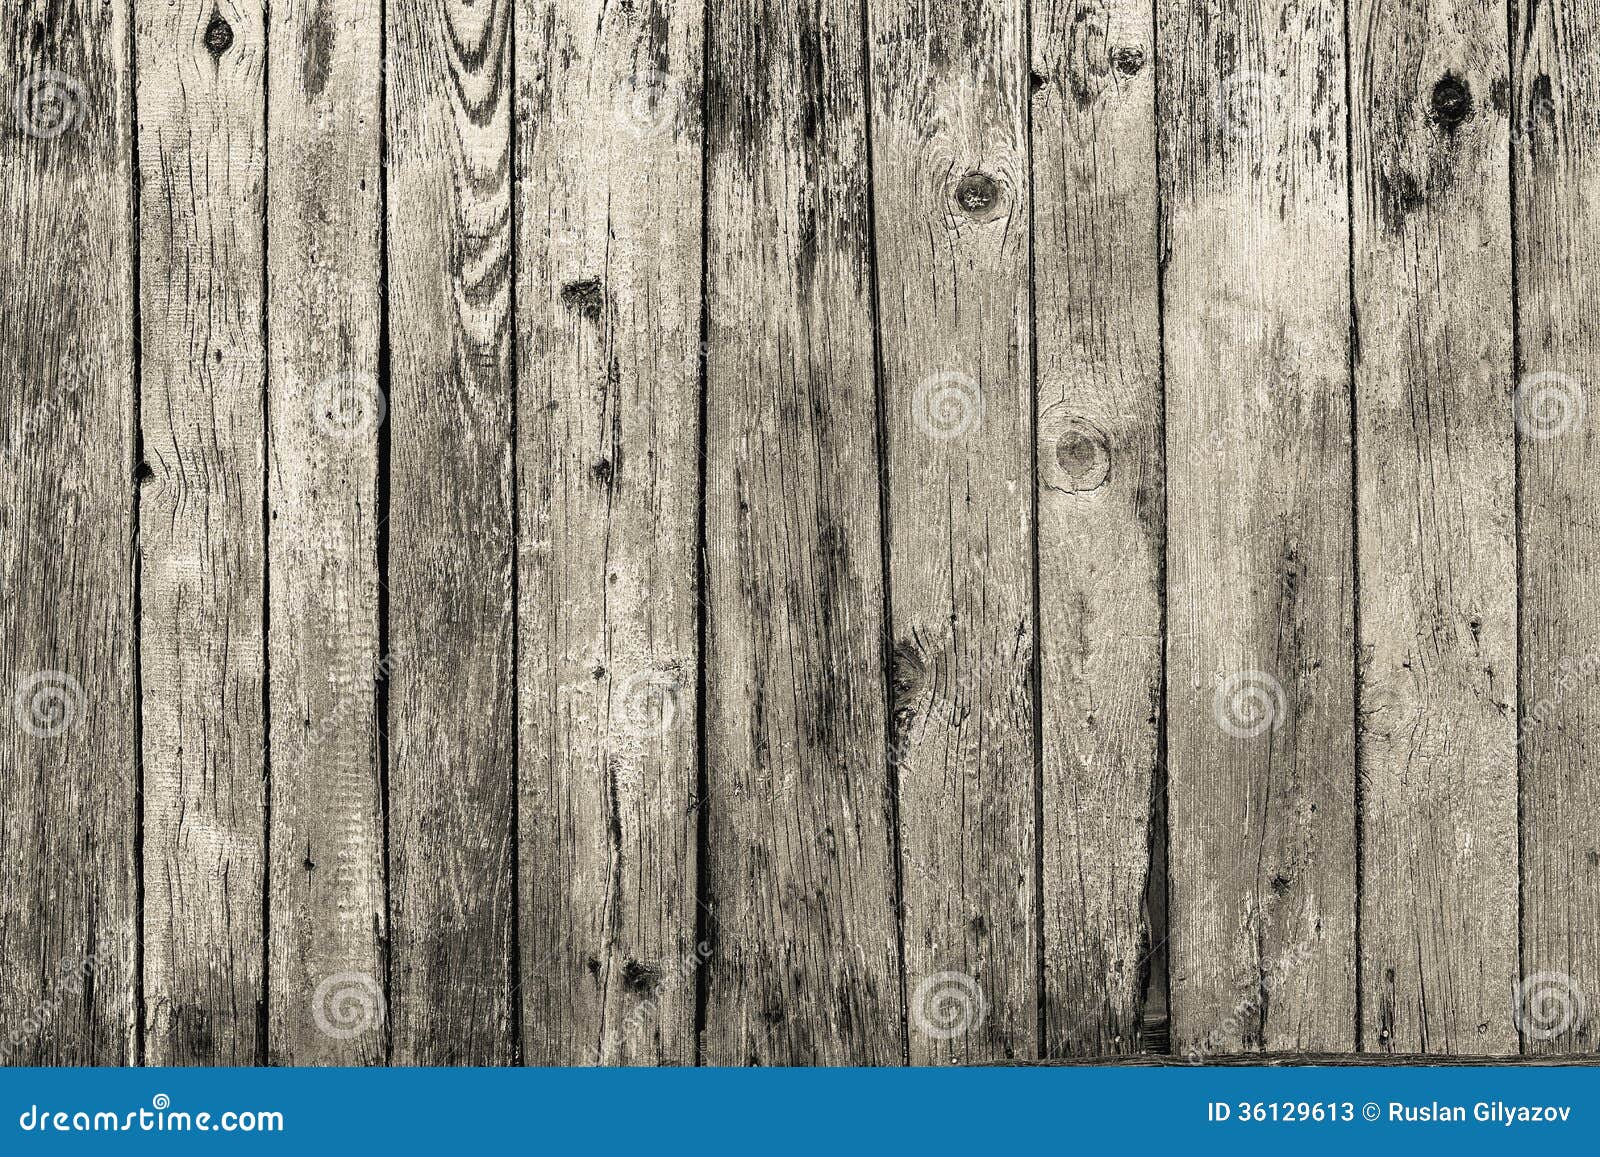 high resolution grunge wood backgrounds